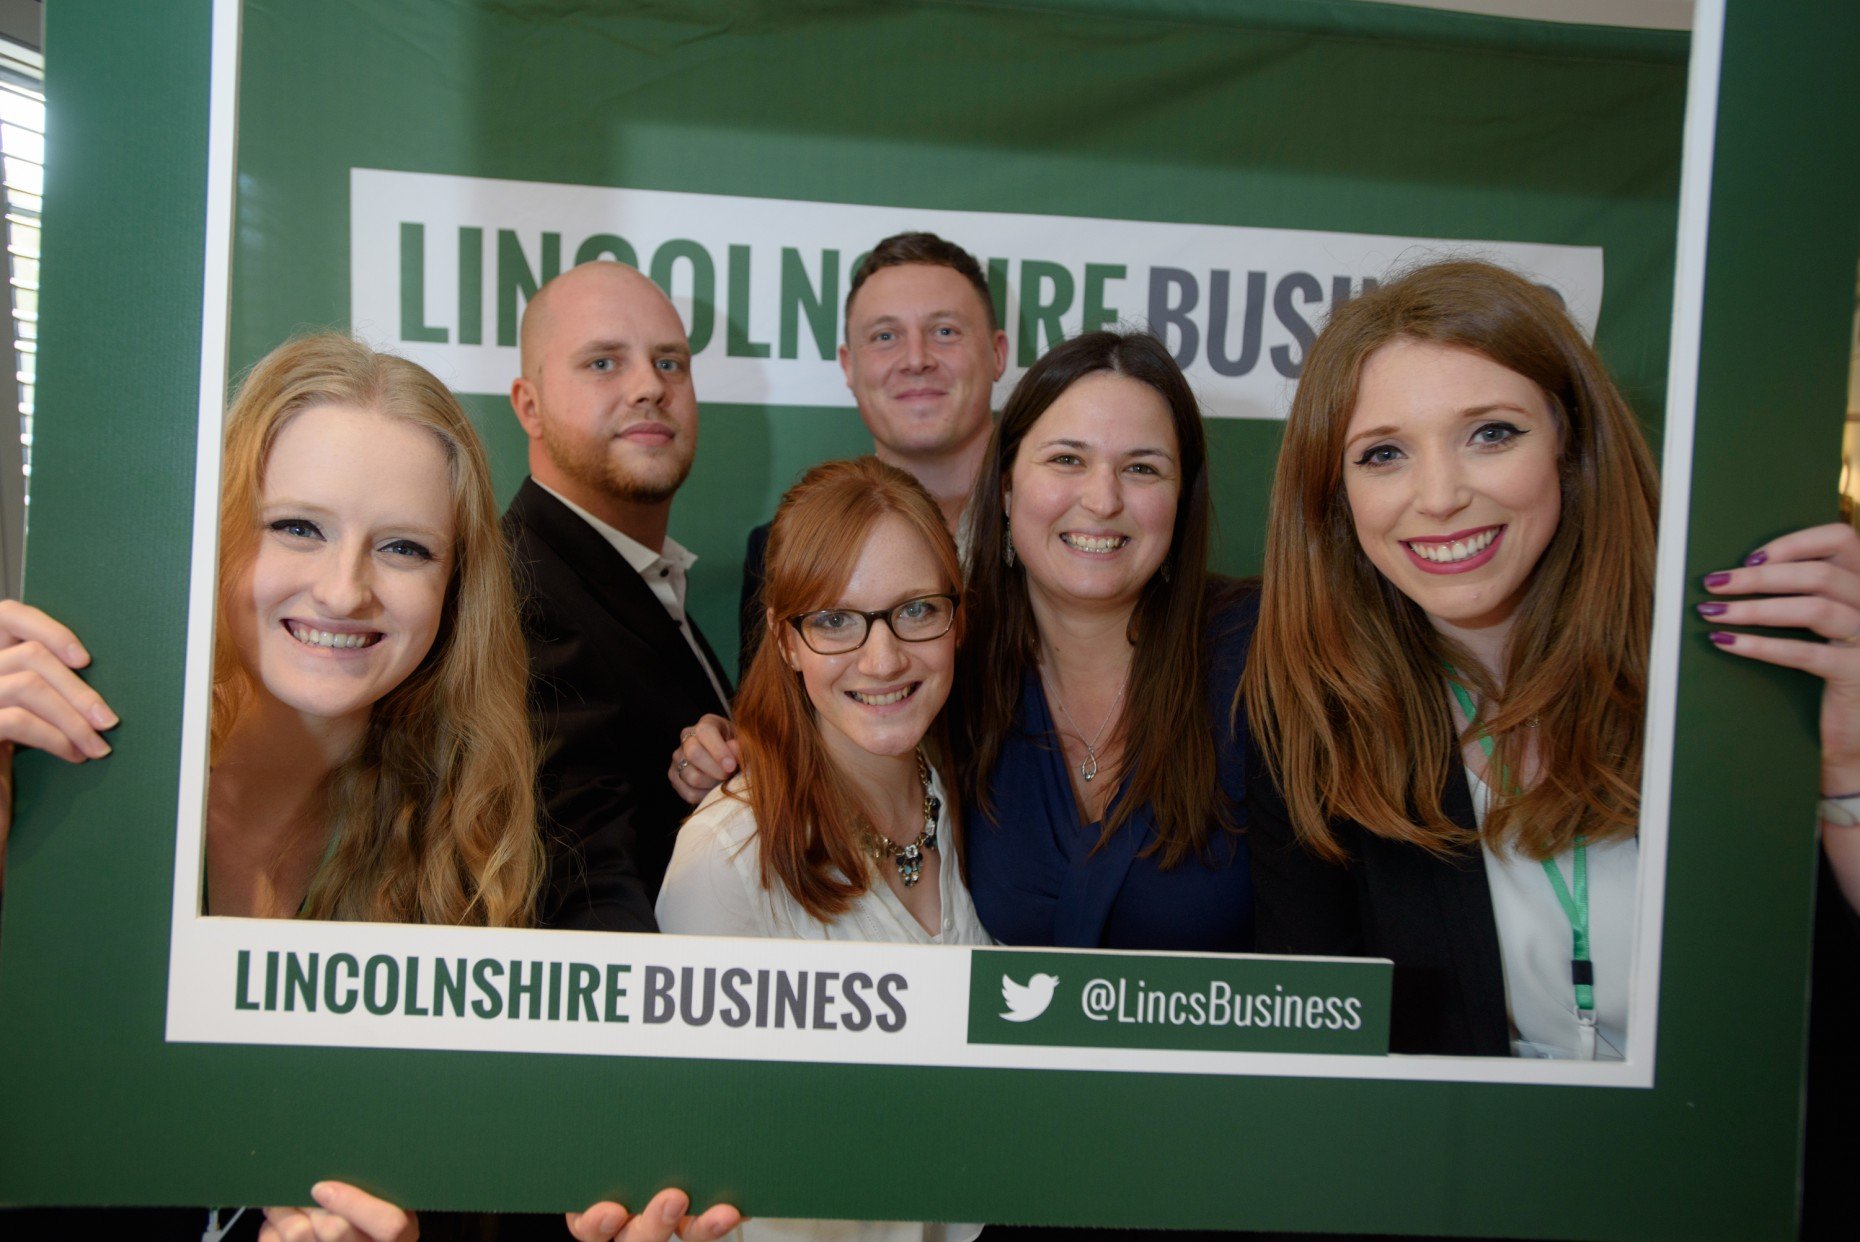 The Lincolnshire Business team